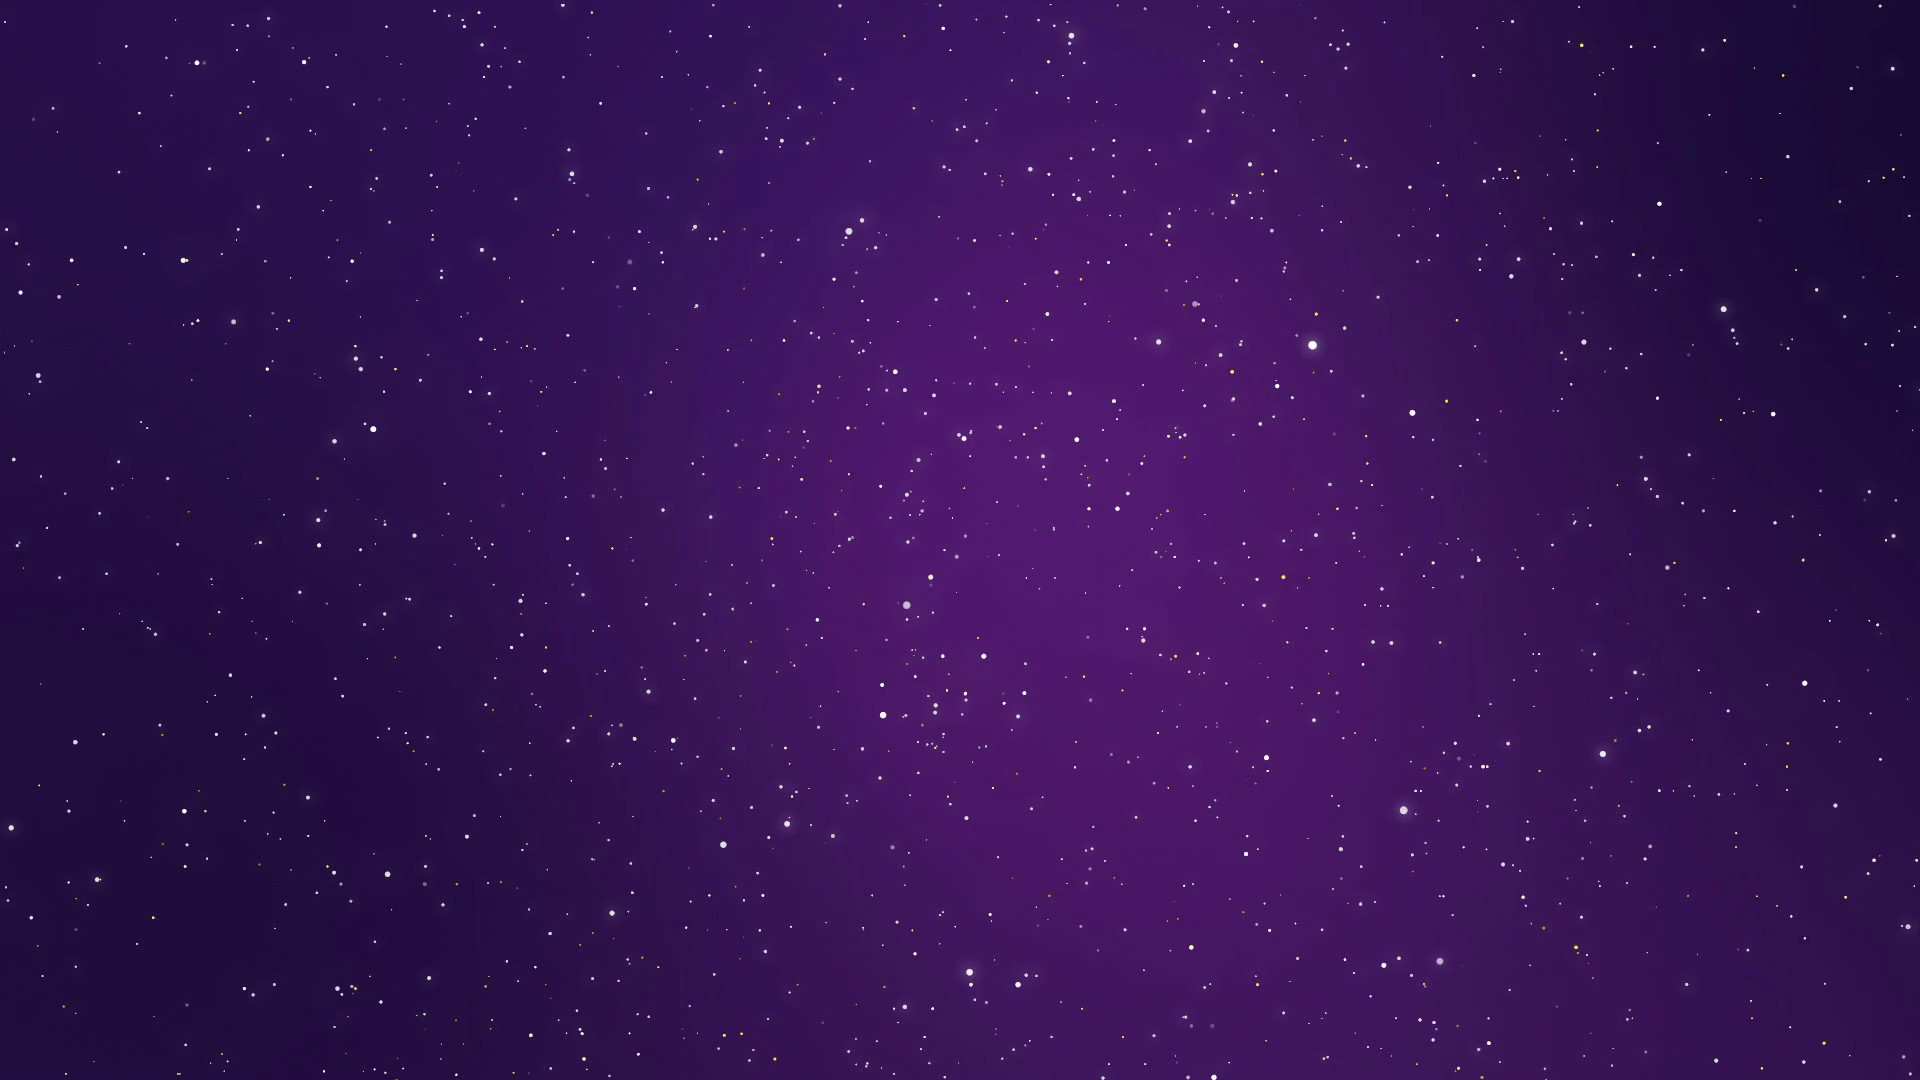 1920x1080 Night sky full of stars fantasy animation made of magical sparkly white and  yellow light particles flickering on a dark purple background Motion  Background ...